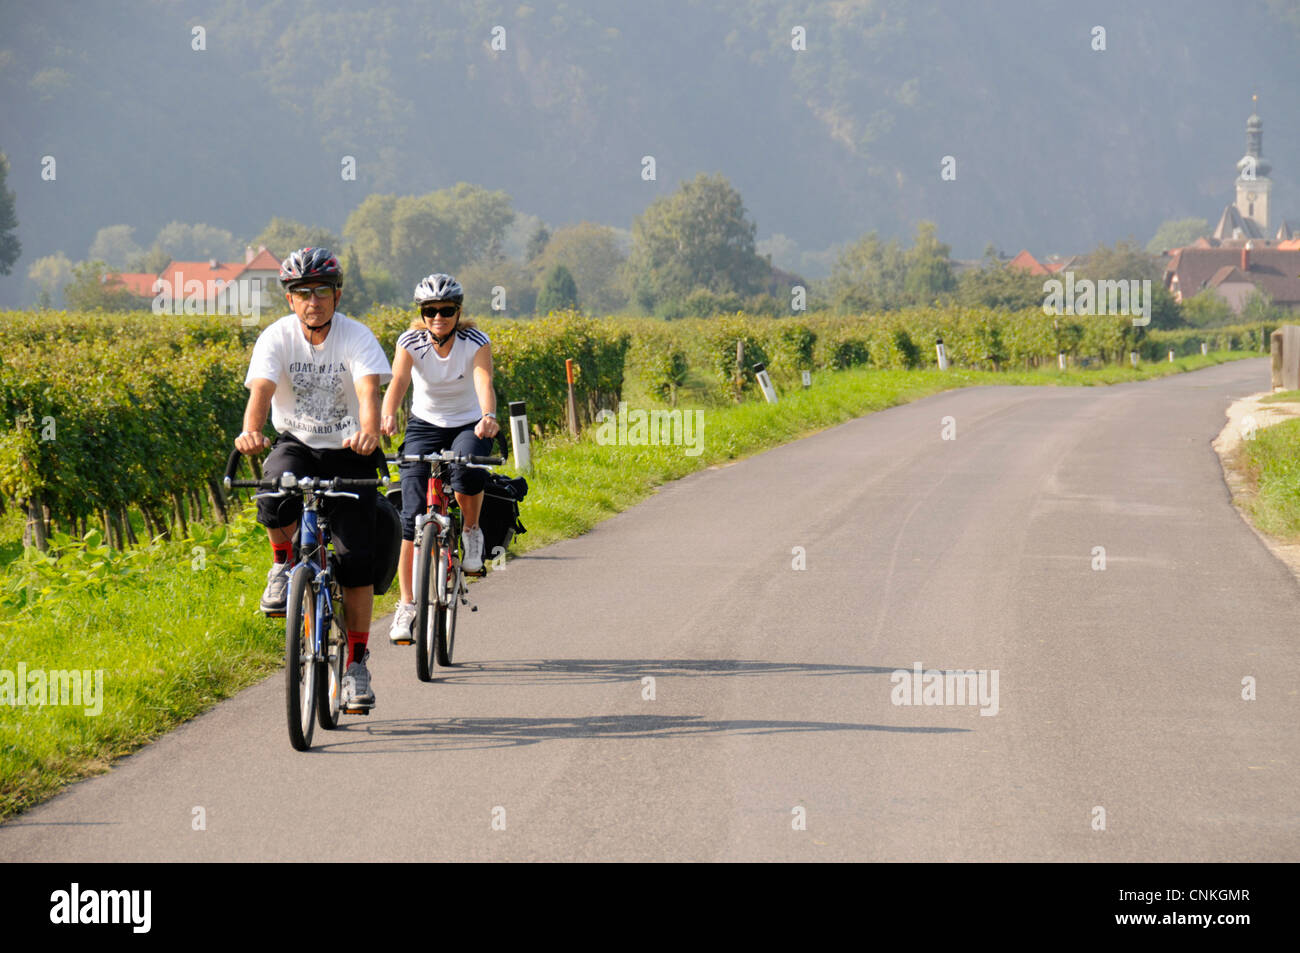 Two cyclists on a cycling holiday near the village of Unterloiben in the wine-growing of Wachau region, Lower Austria, Austria Stock Photo